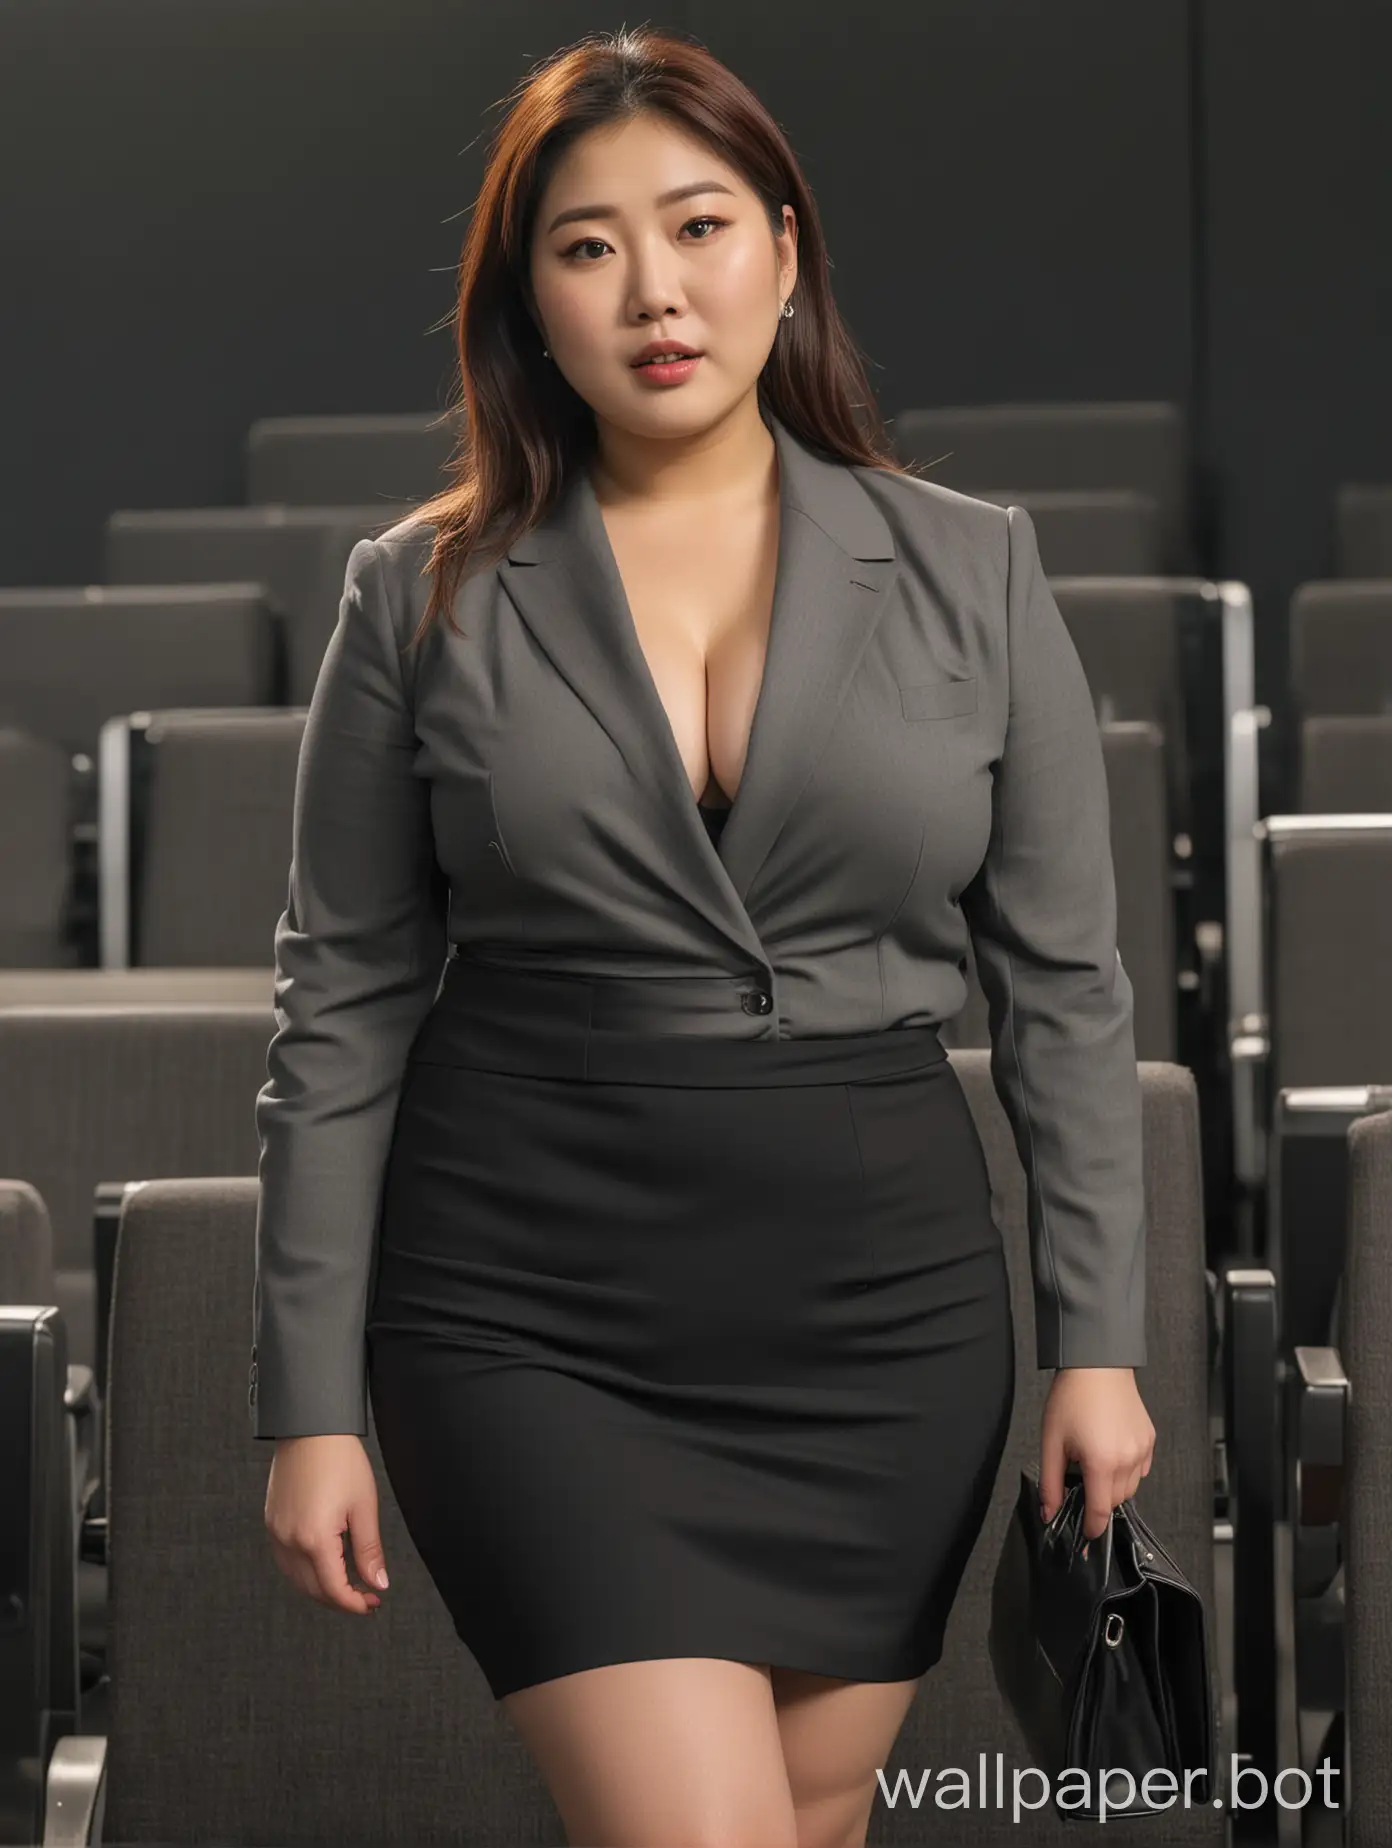 PlusSize-South-Korean-Woman-in-Stylish-Business-Attire-at-Tokyo-Movie-Theater